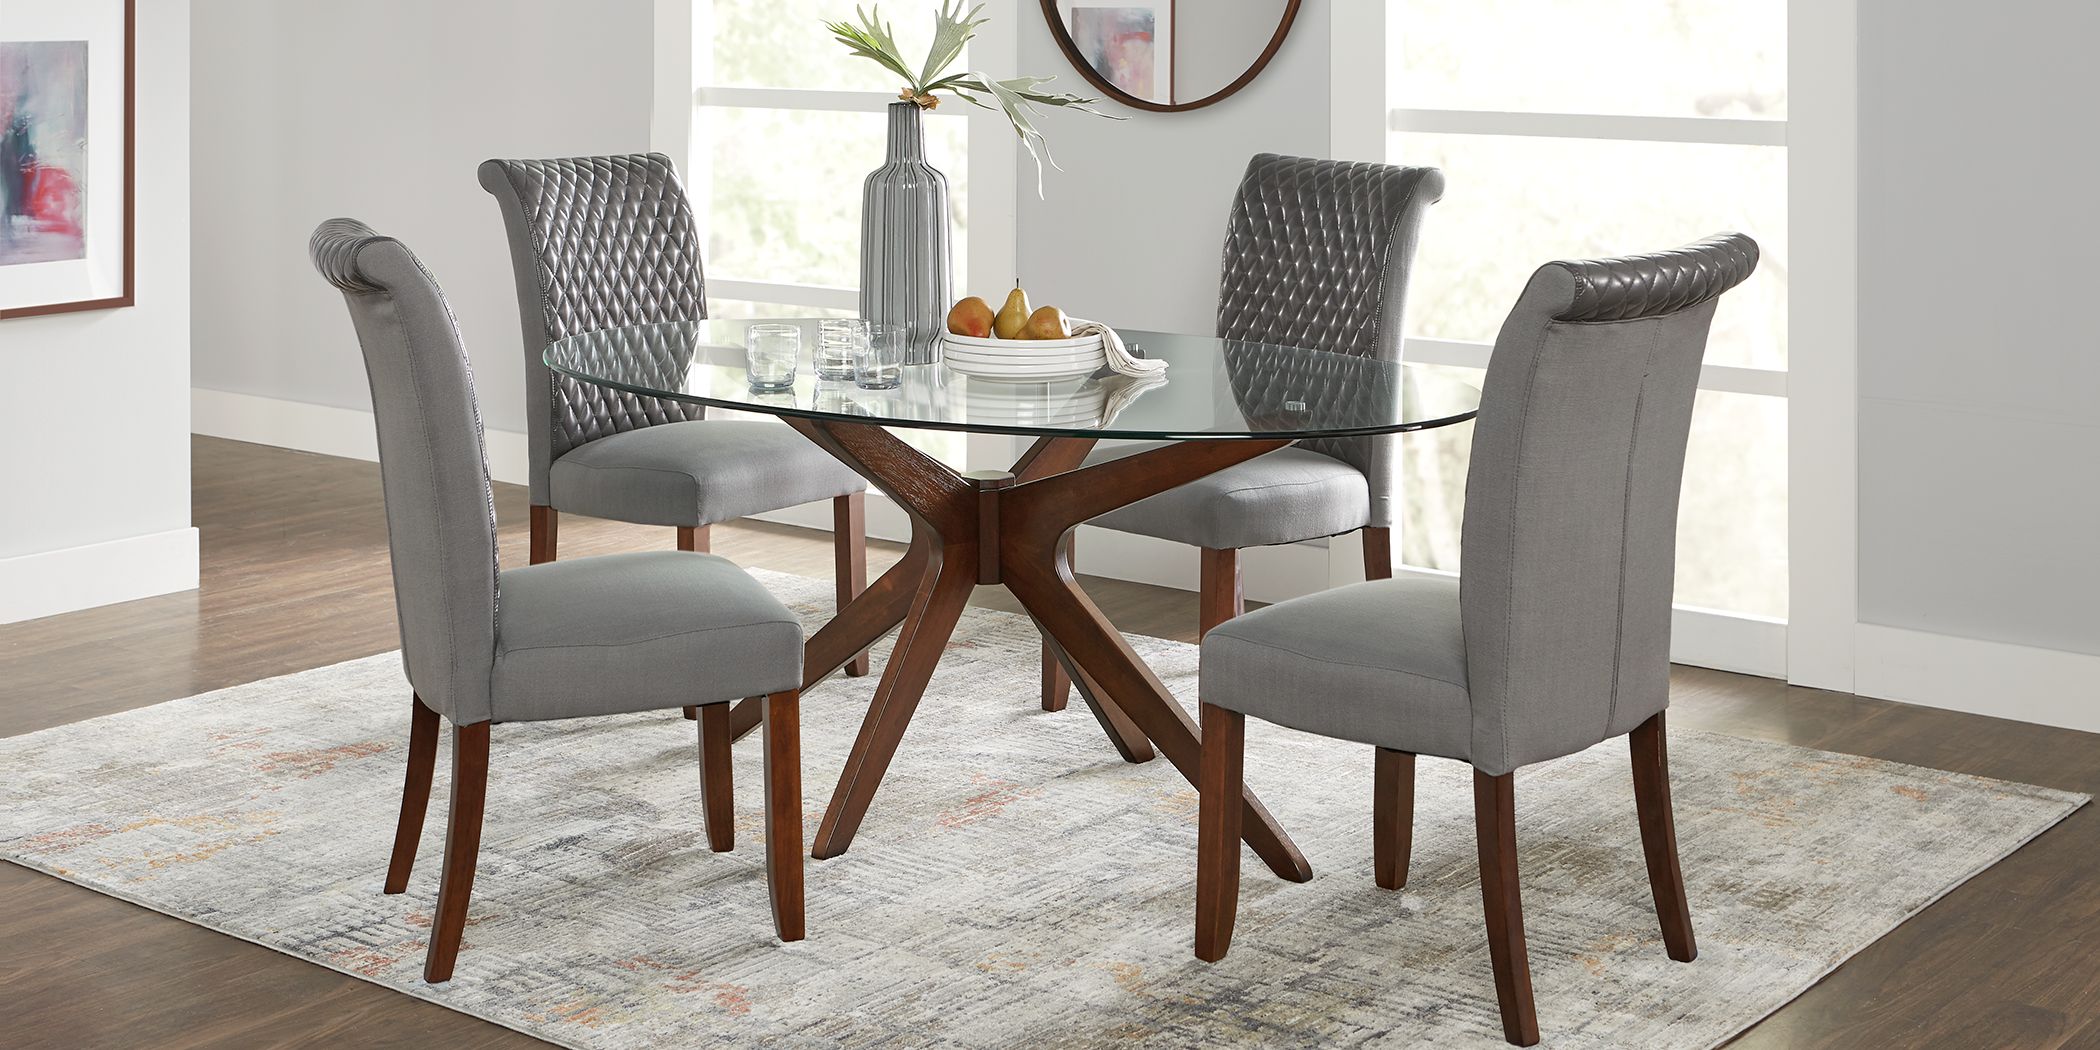 5pc dining room set oval